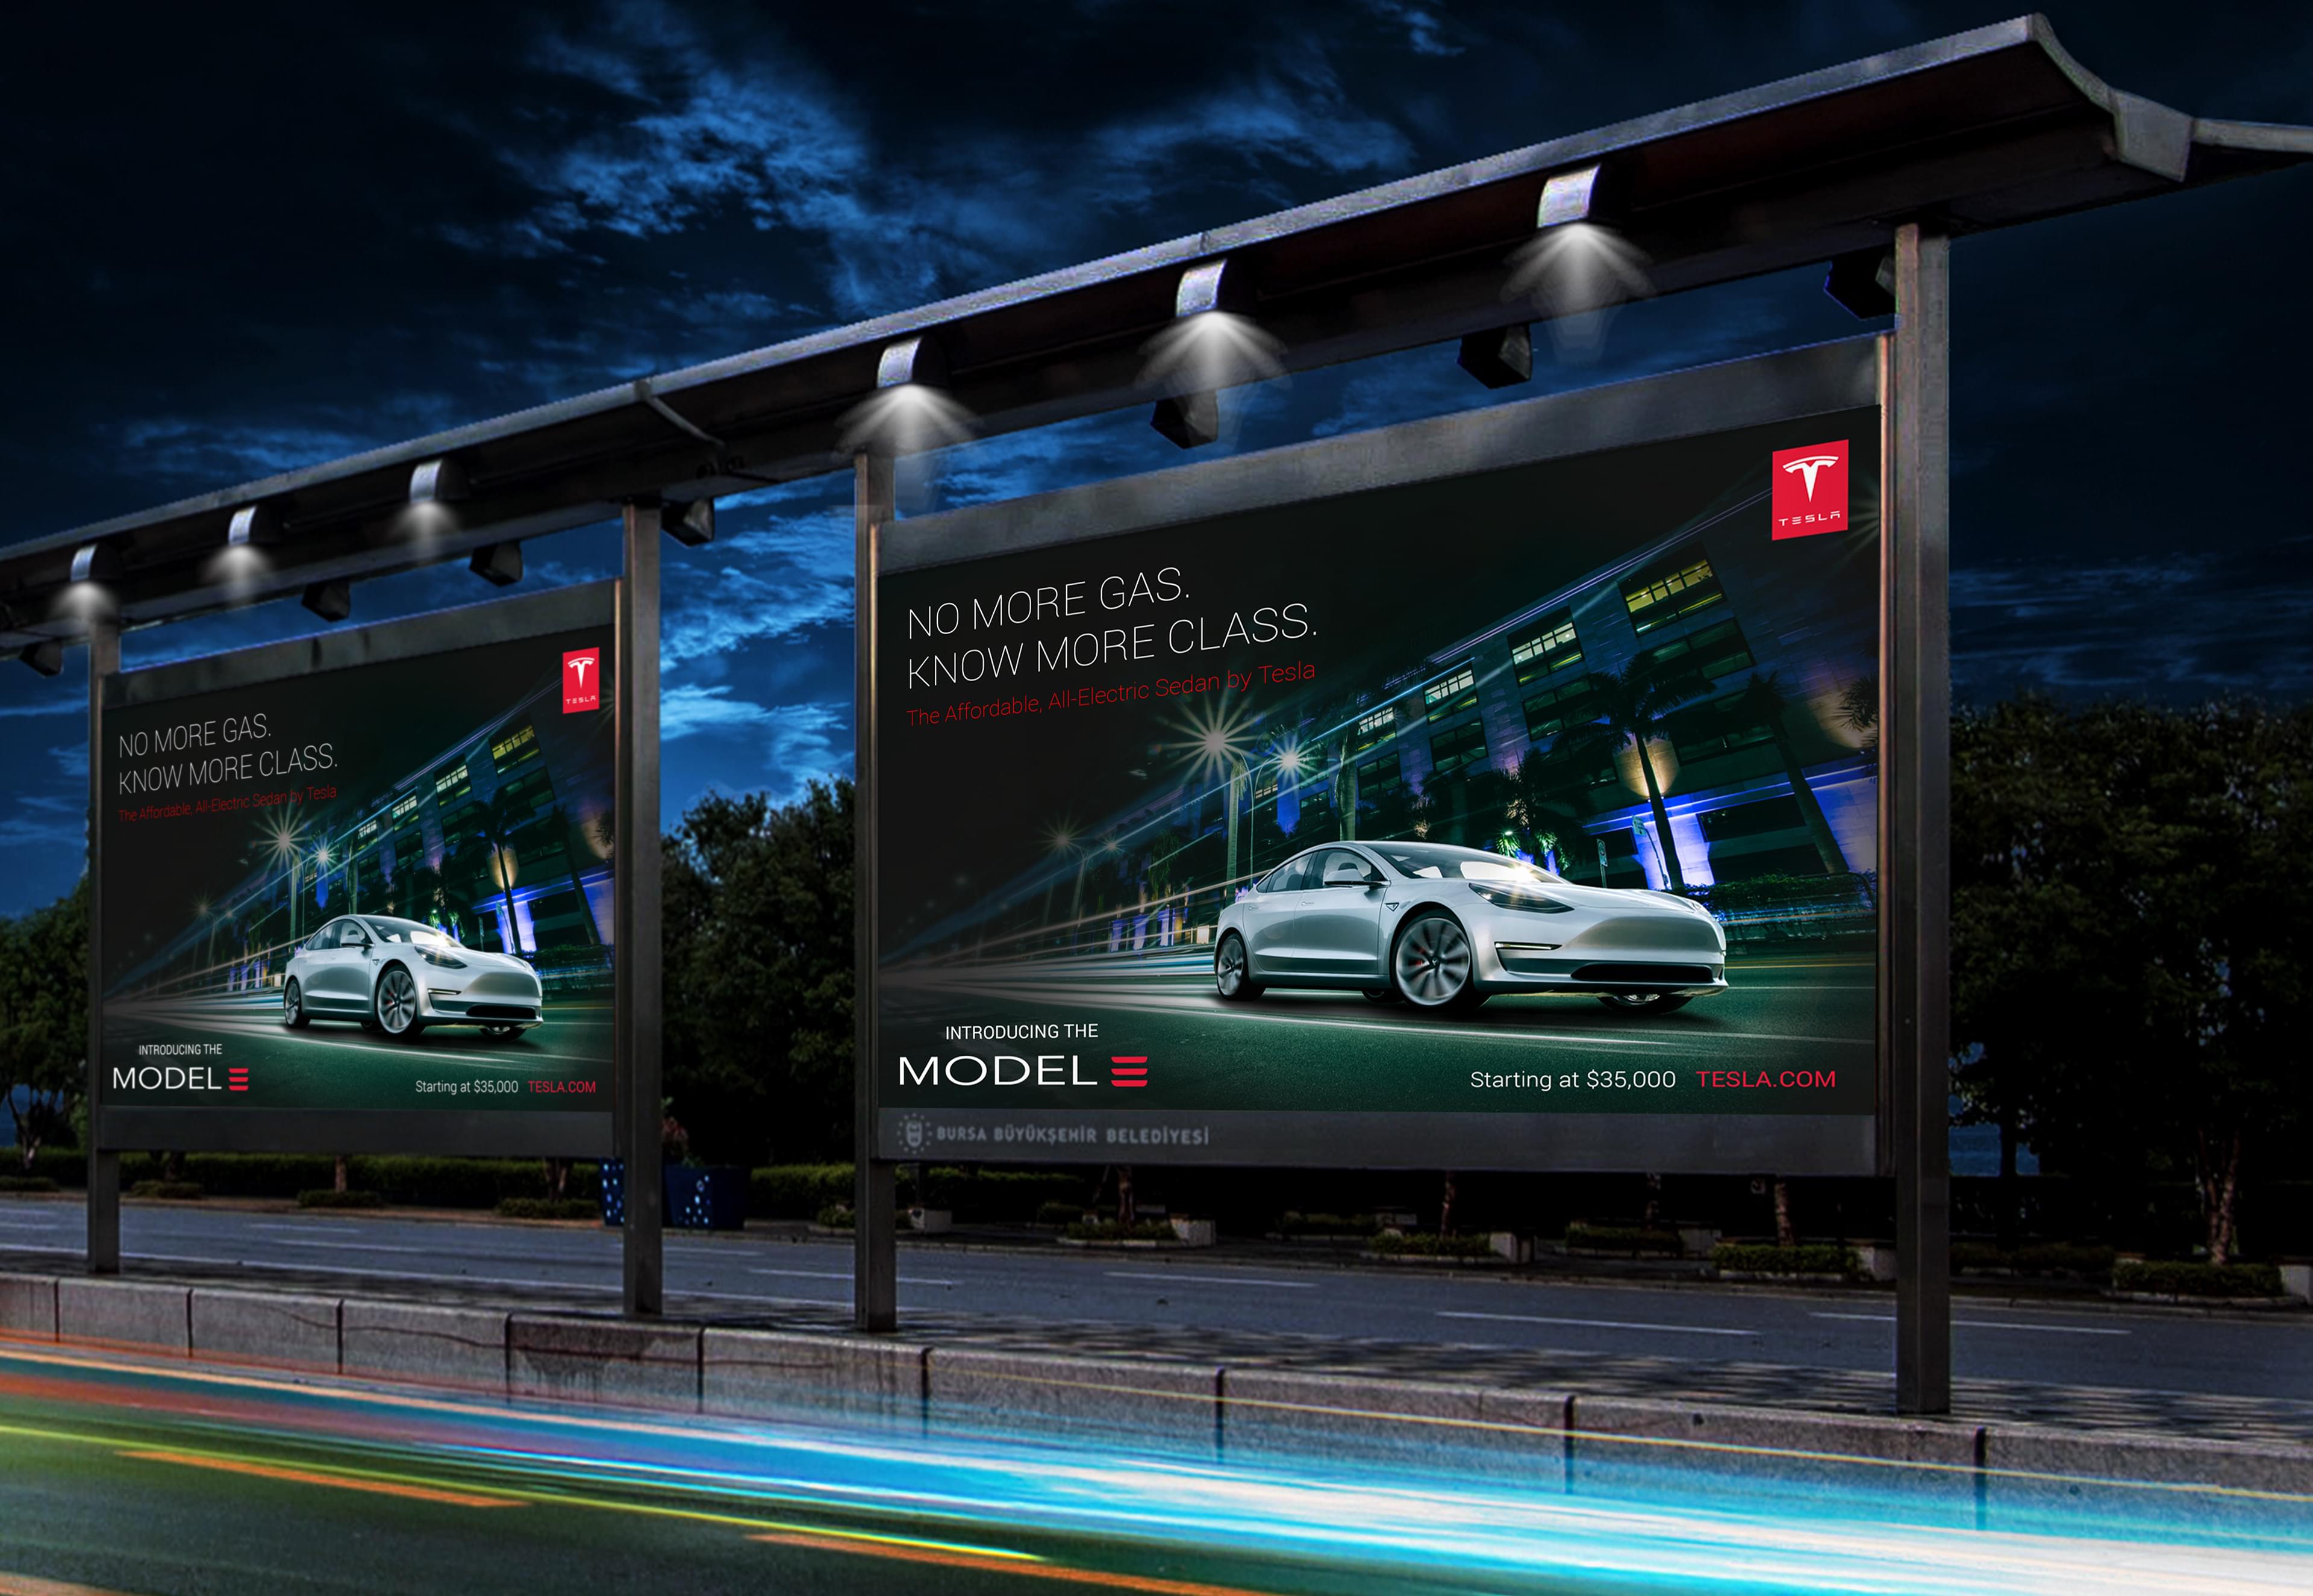 This digital billboard for Tesla is inviting consumers to take a closer look